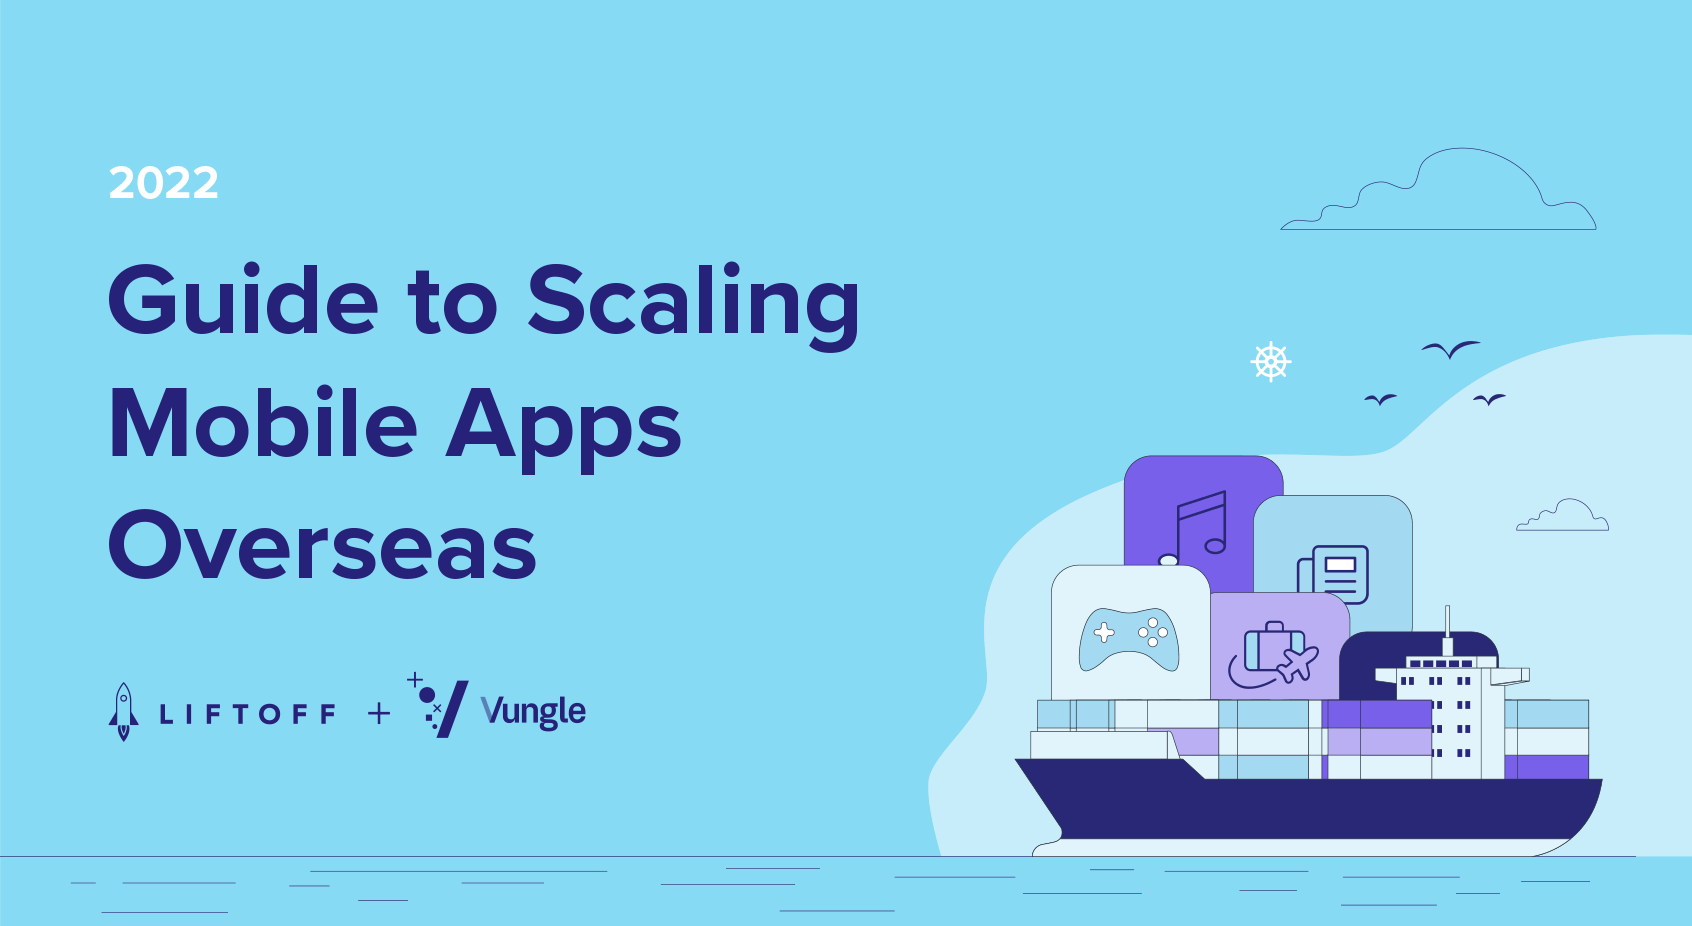 2022 Guide to Scaling Mobile Apps Overseas